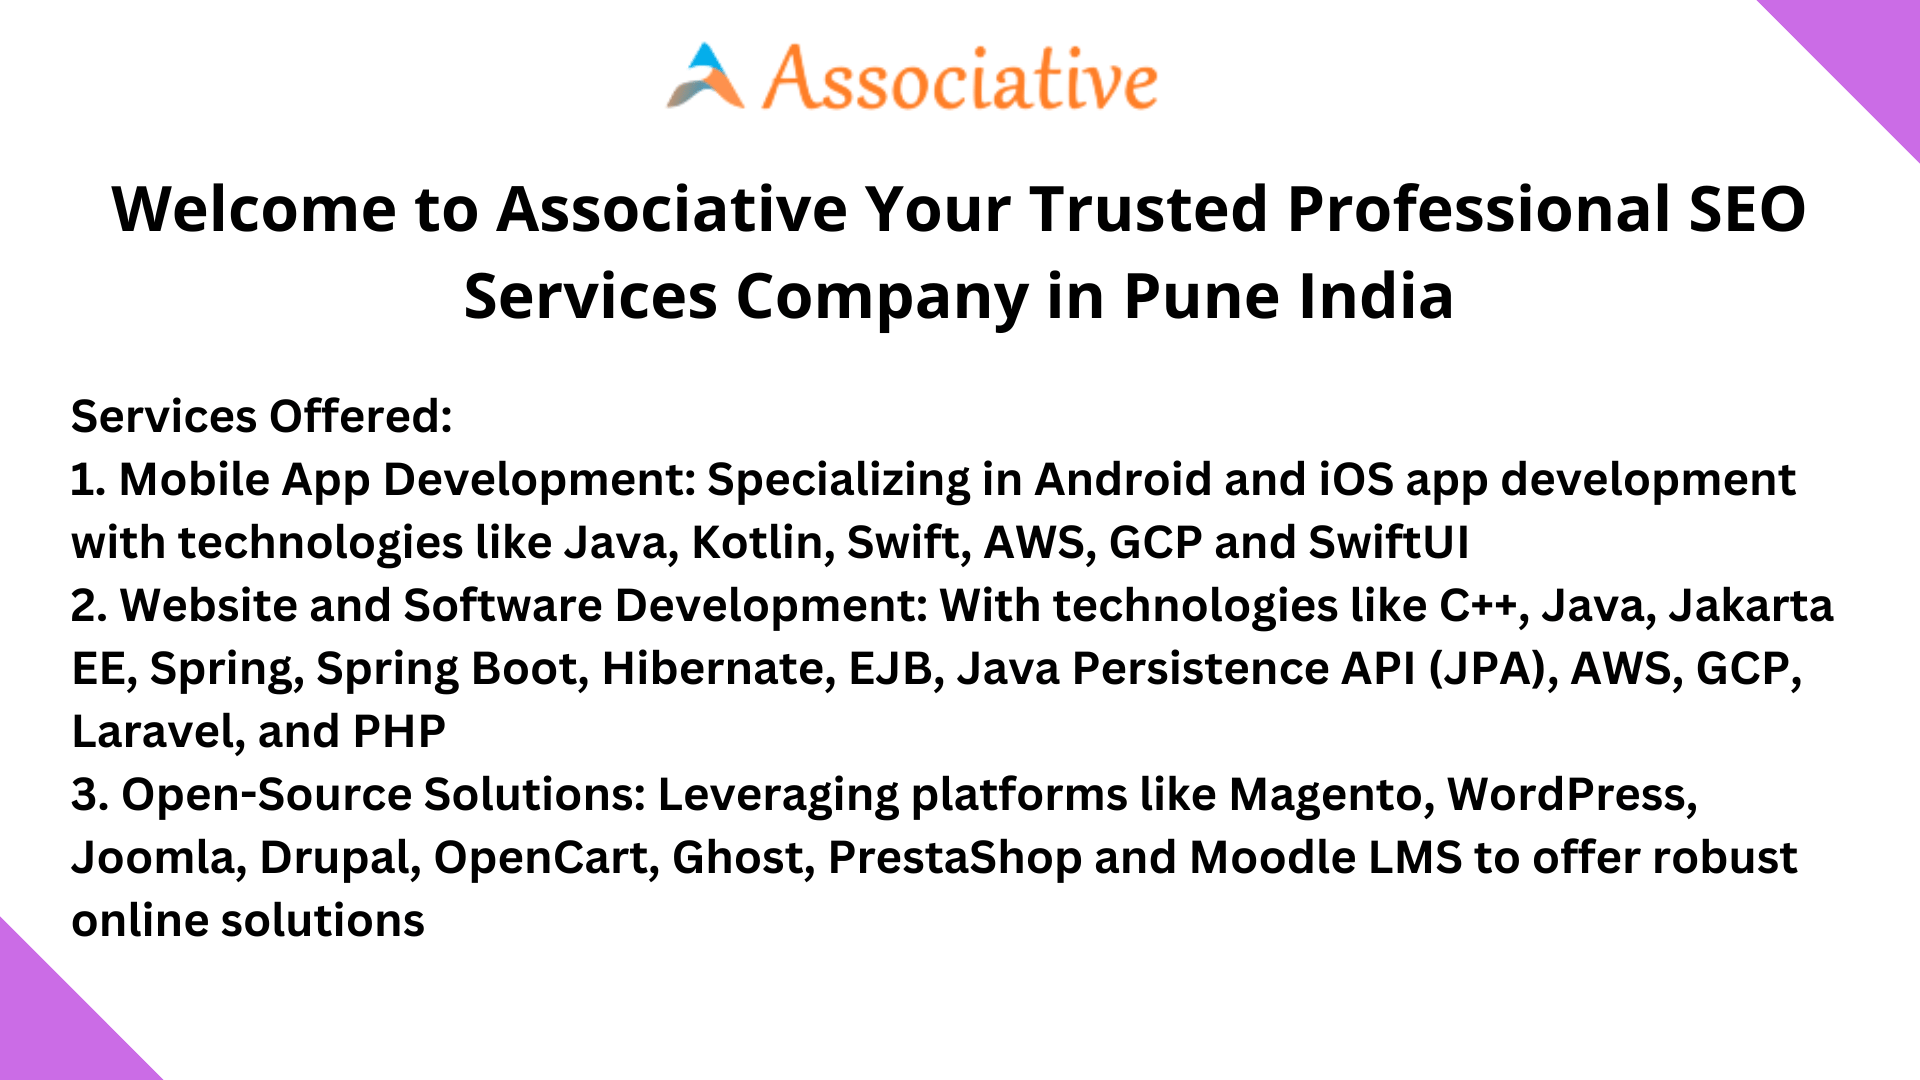 Welcome to Associative Your Trusted Professional SEO Services Company in Pune India